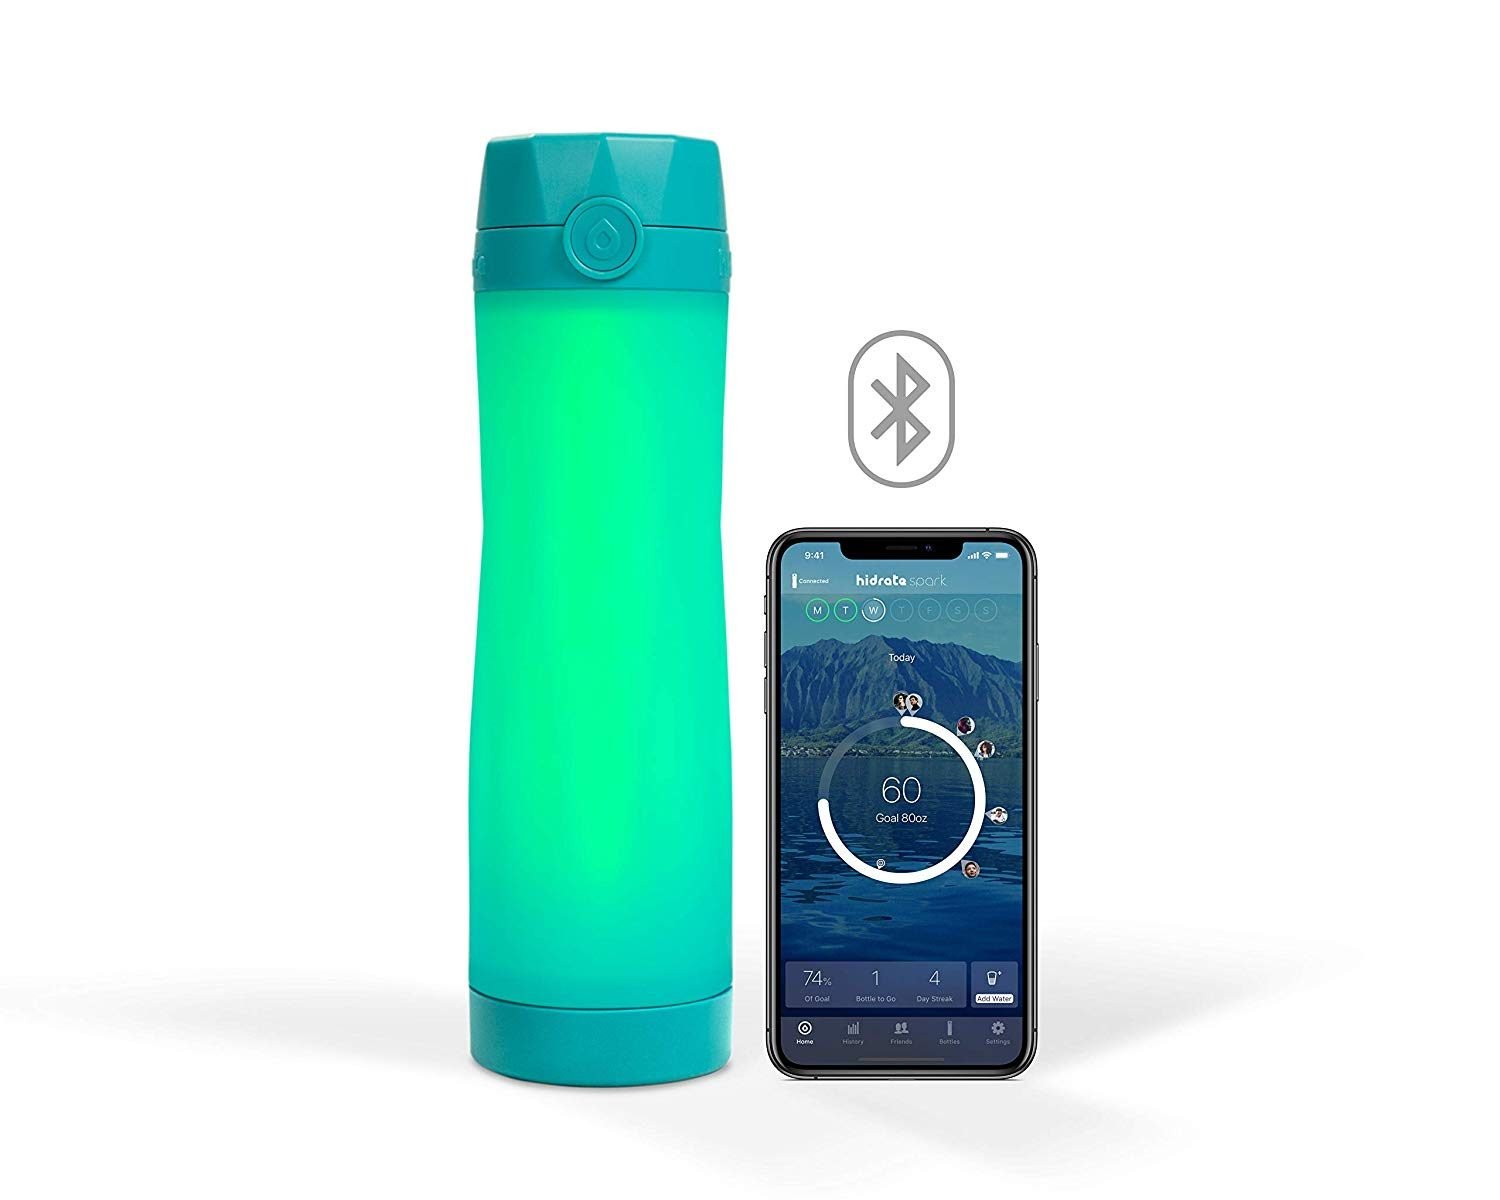 Travelers Love This Smart Water Bottle